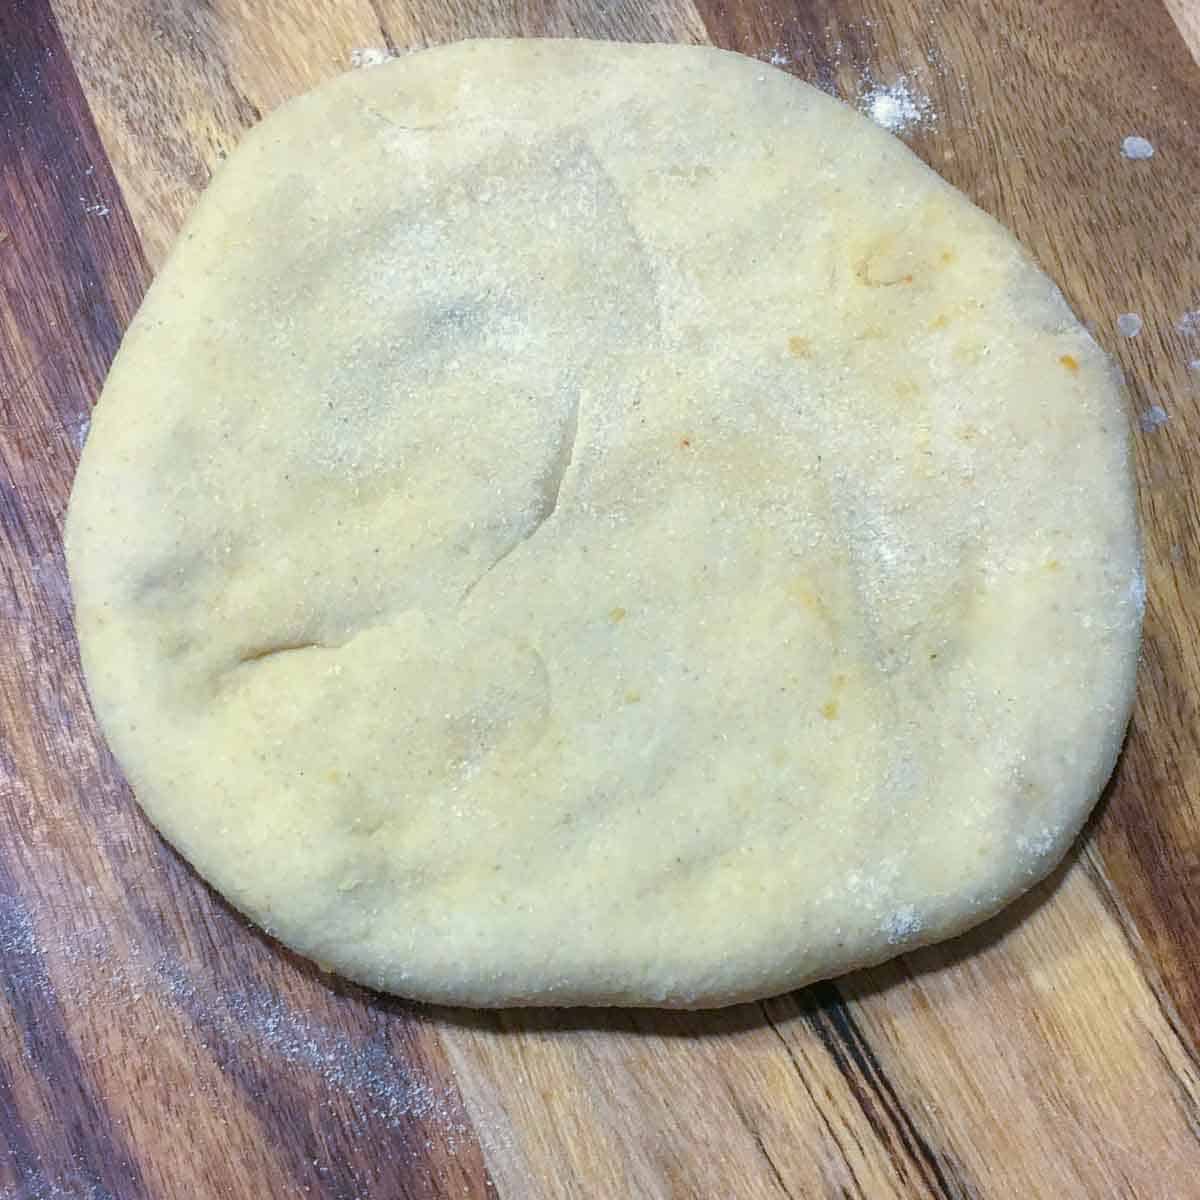 Step showing the sealed dough with potato filling inside.